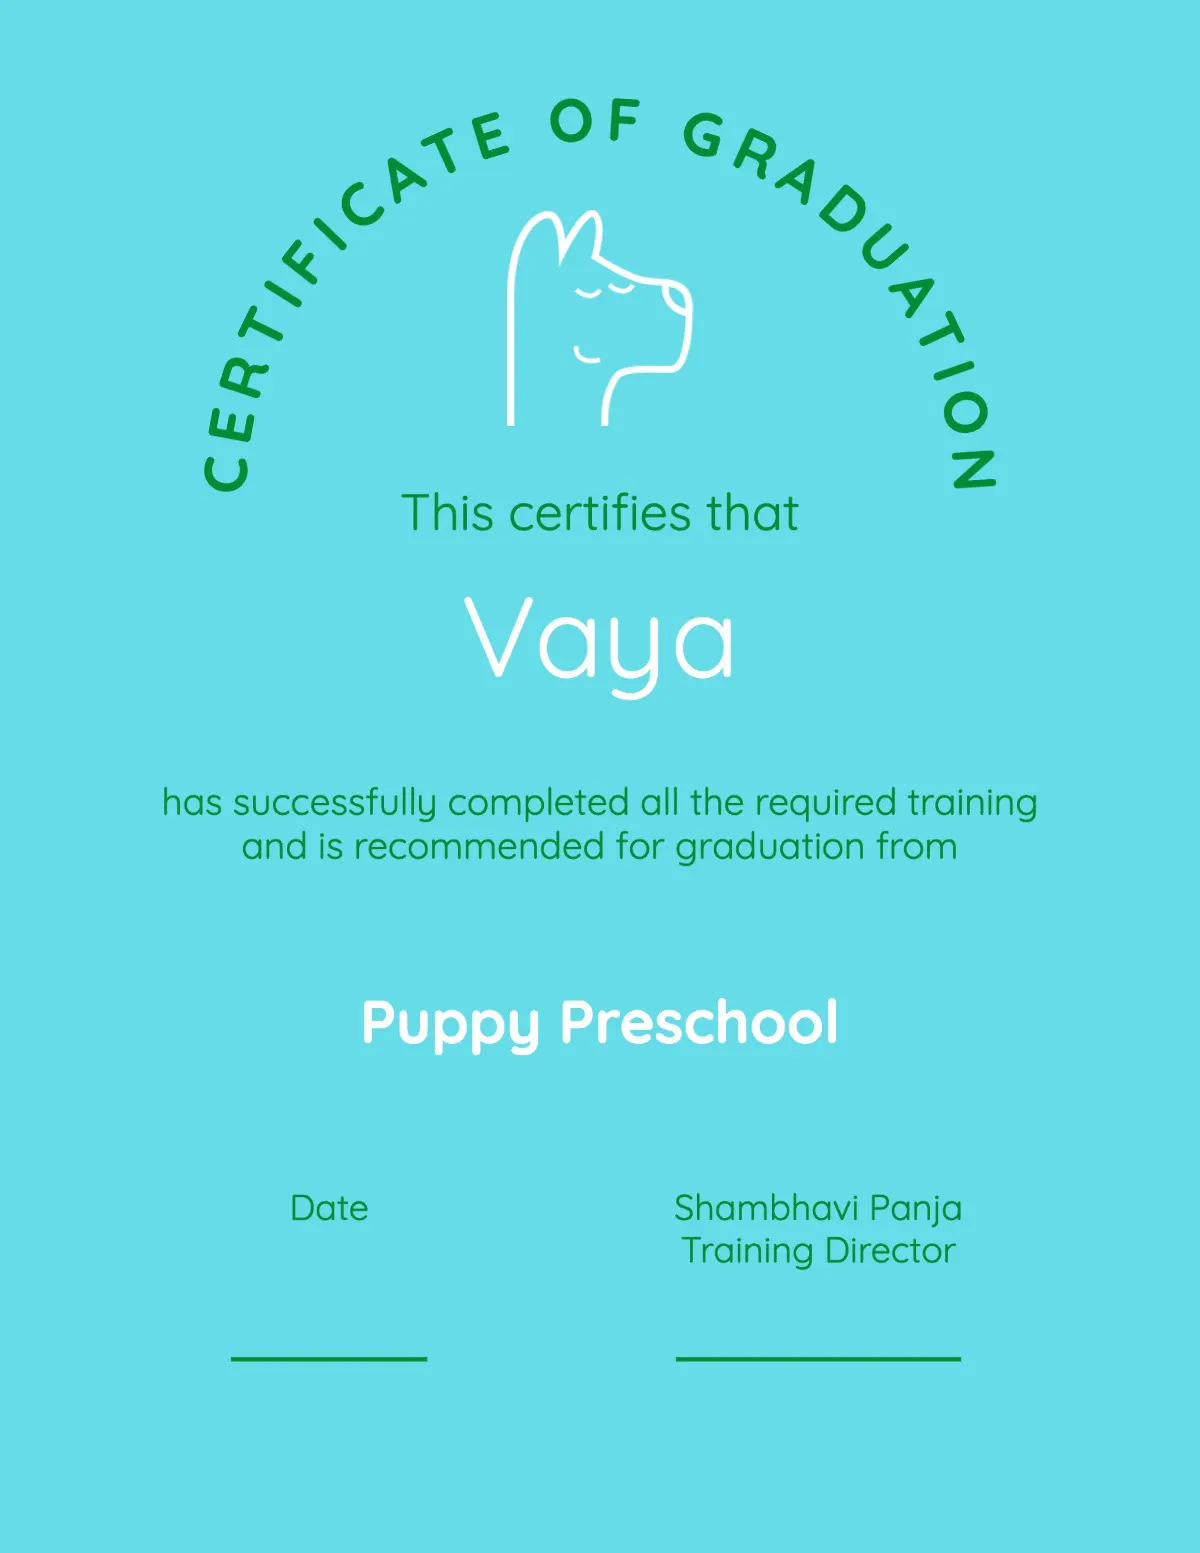 Green and Blue Puppy Preschool Certificate of Diploma